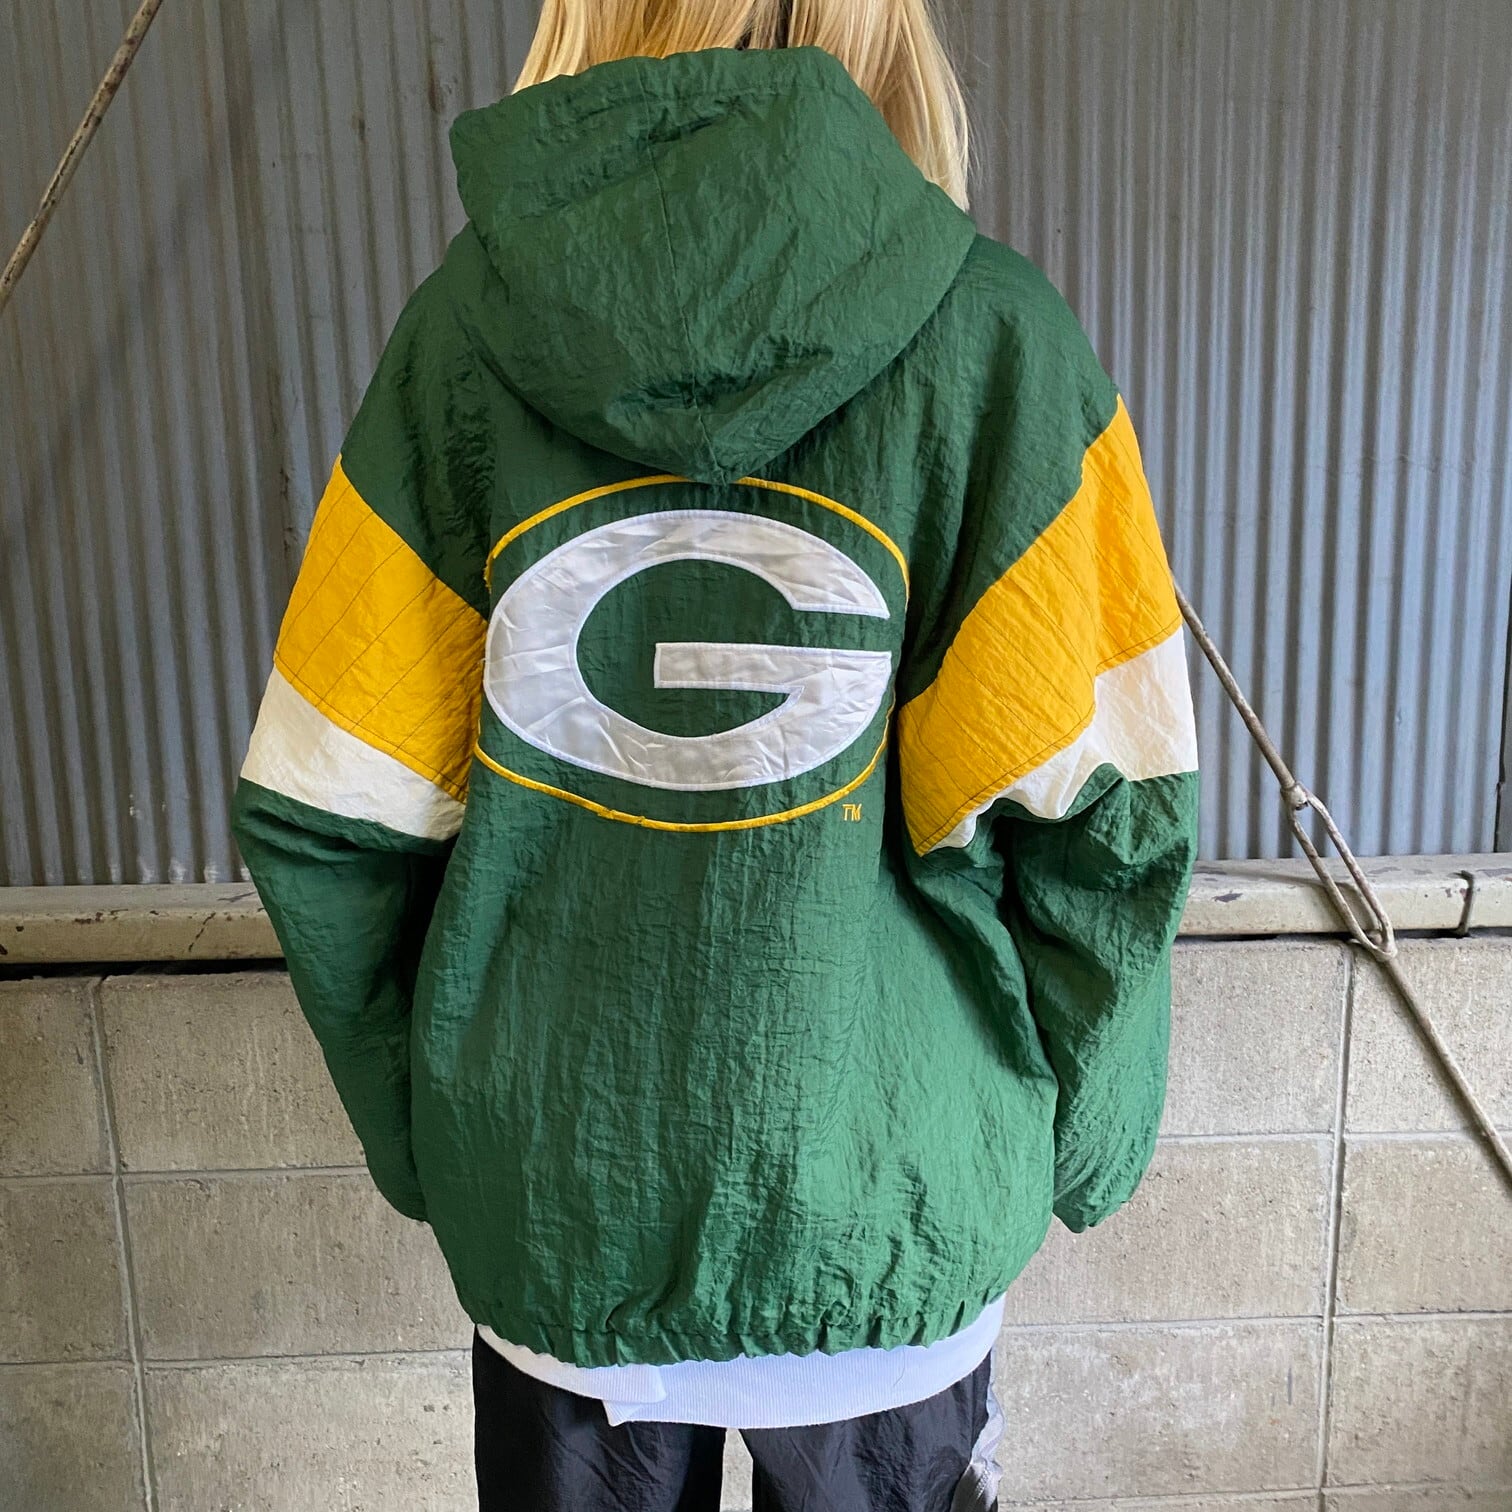 packers スターター 90s レア